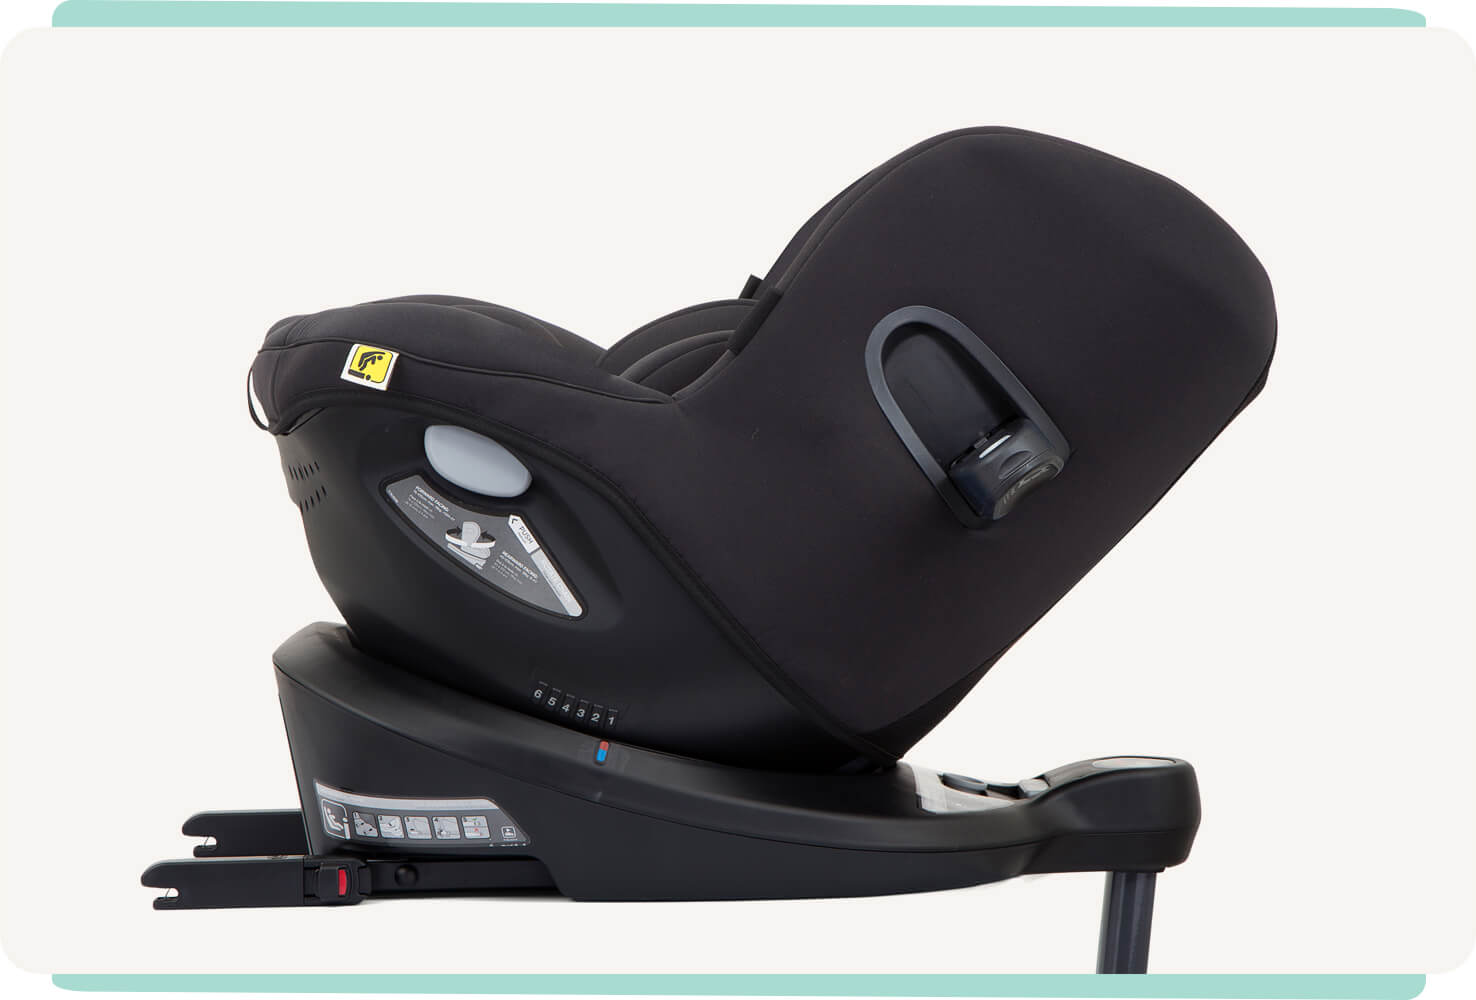     Joie I-Spin 360 spinning car seat in black in profile facing to the left and fully reclined.